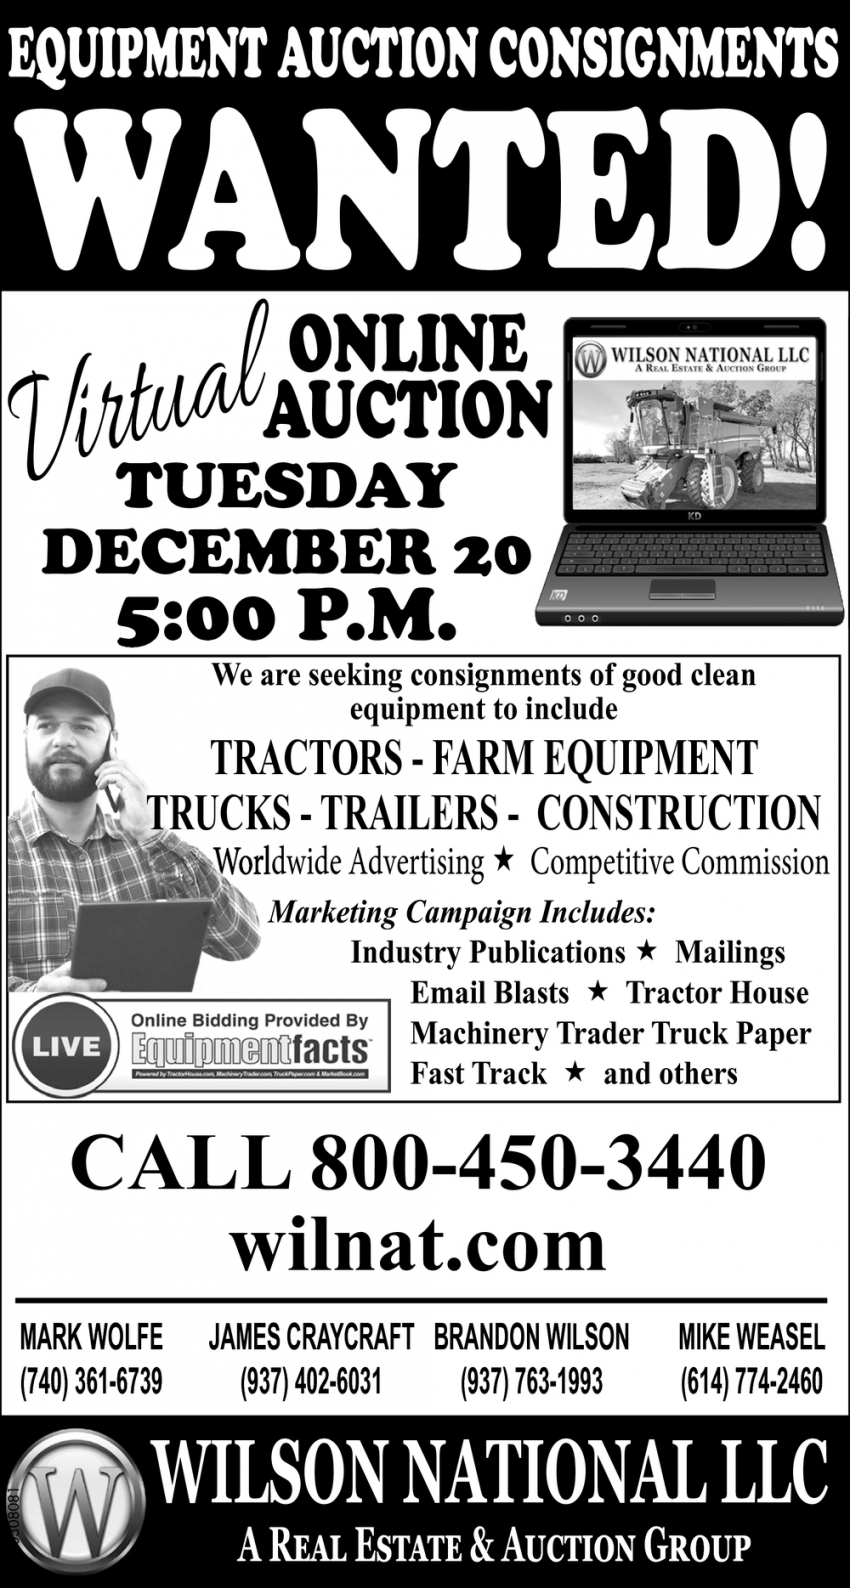 Equipment Auction Consignments